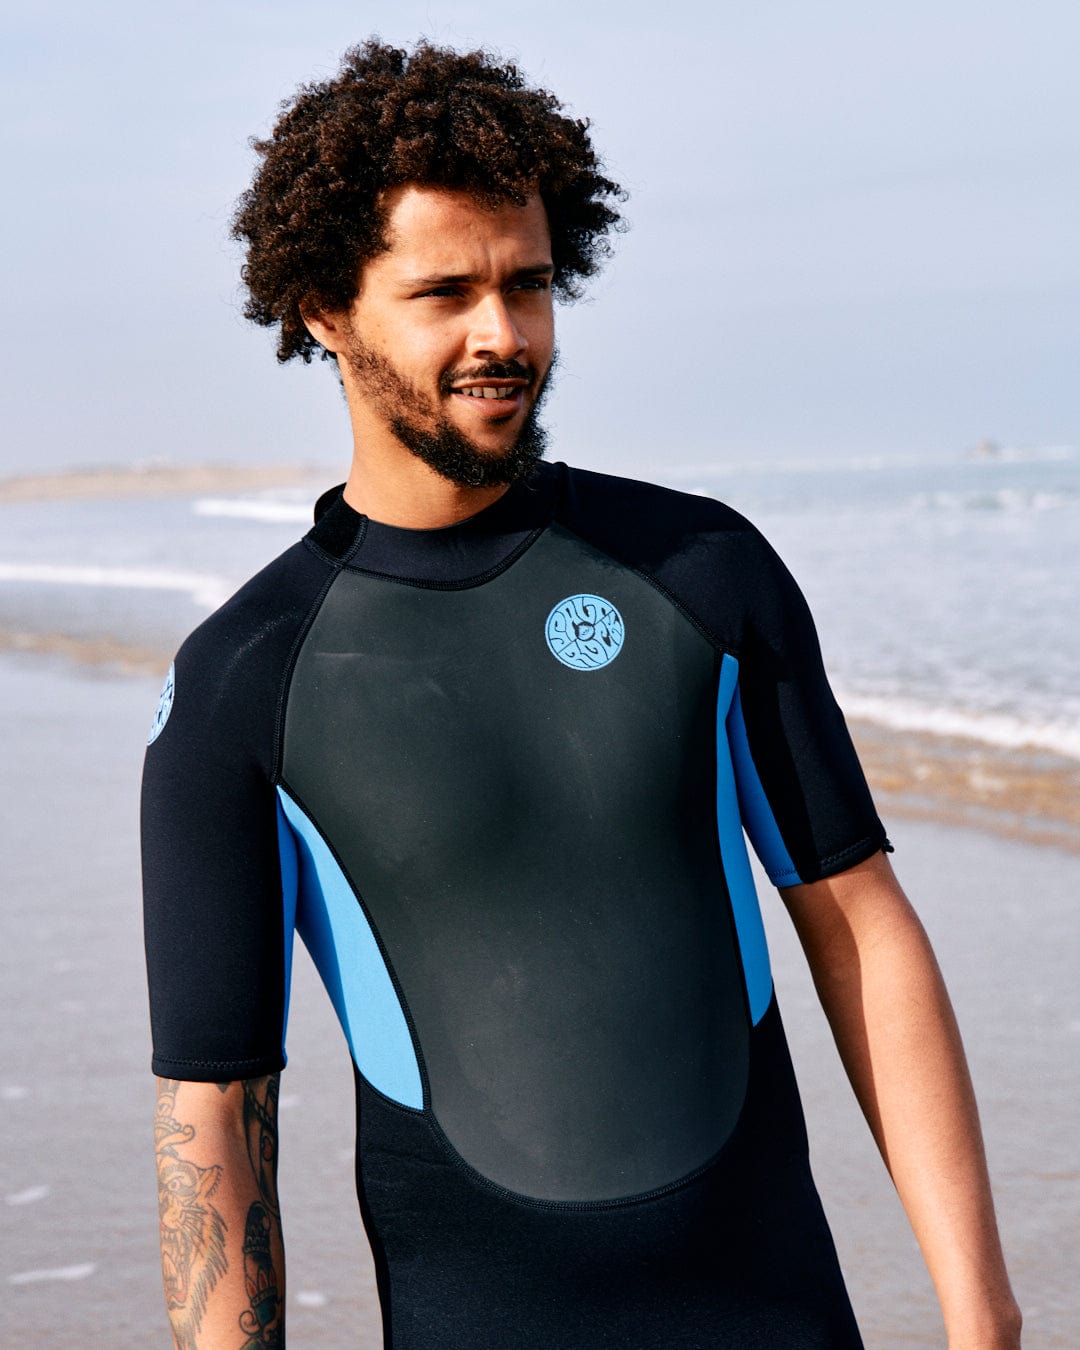 A man in a Saltrock Core - Men's 3/2 Shortie Wetsuit - Black/Blue stands on a beach, looking to the side, with the ocean in the background.